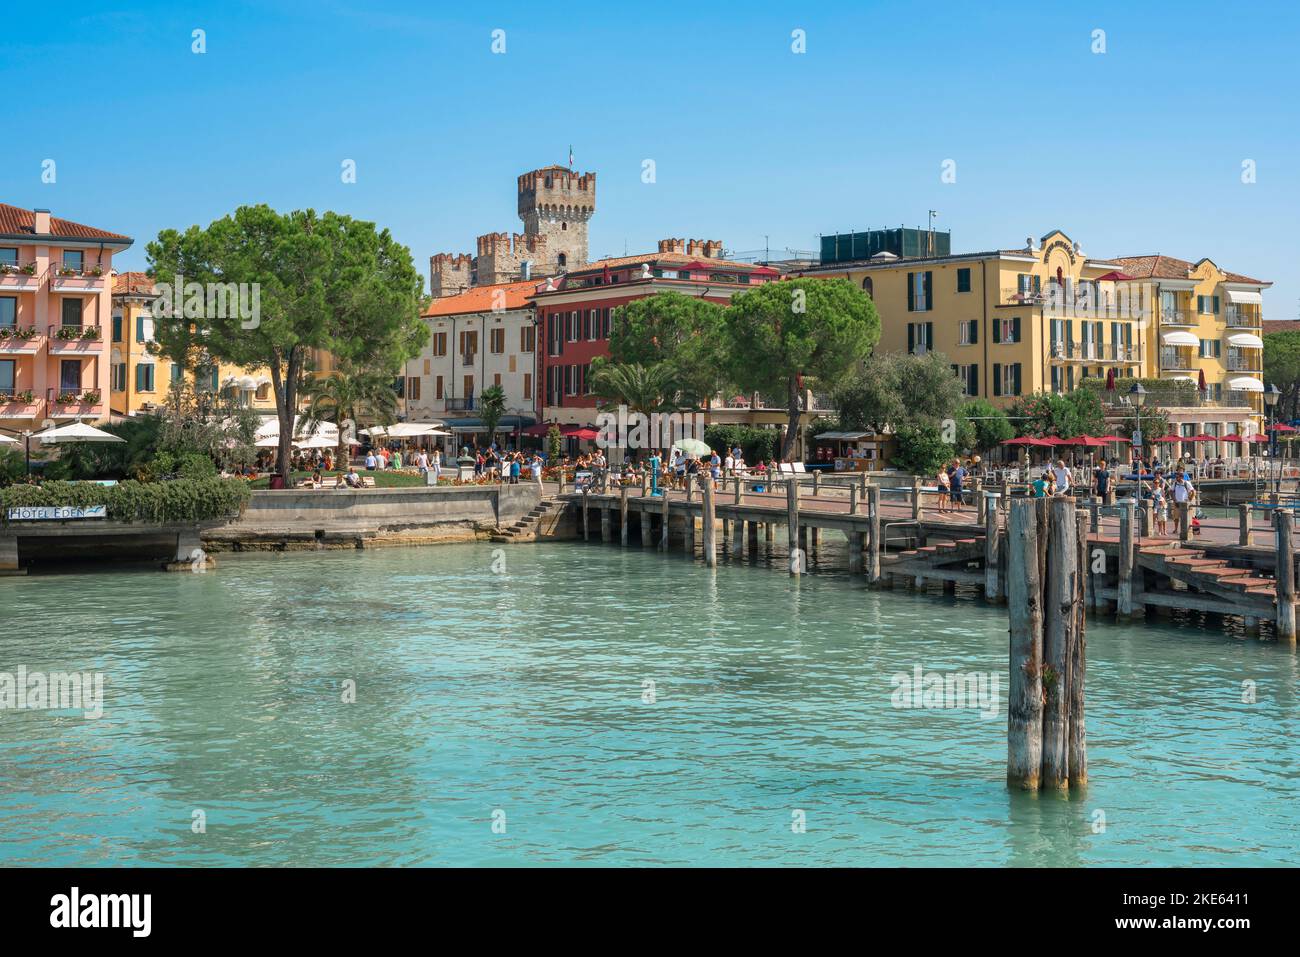 Sirmione Italy, view in summer of the ferry pier in the scenic lakeside town of Sirmione, Lake Garda, Lombardy, Italy Stock Photo